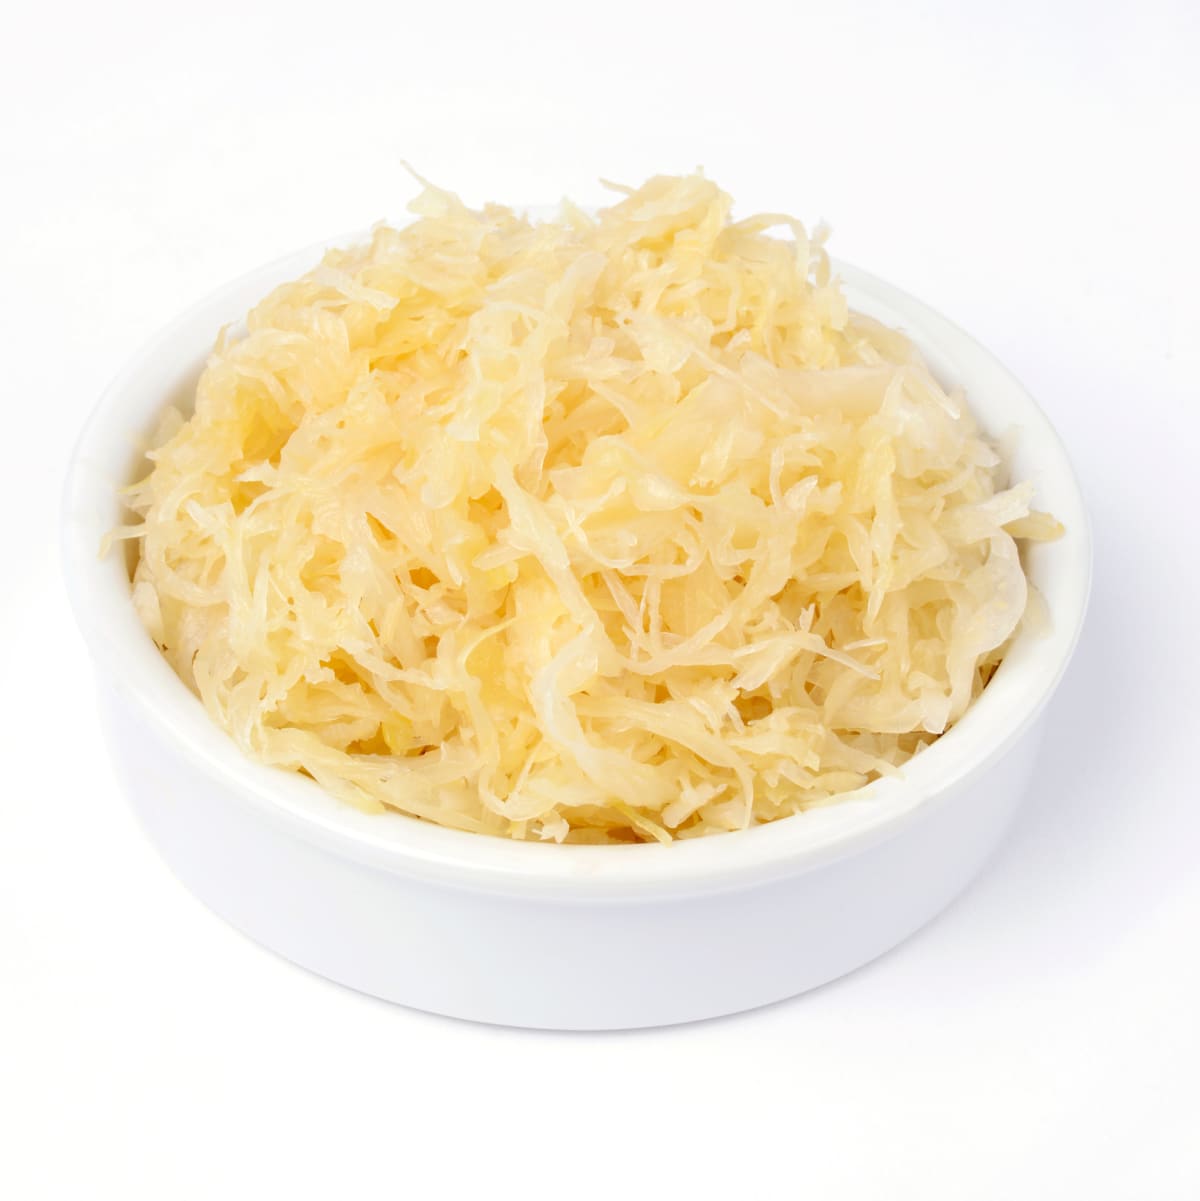 Delicious sauerkraut on plate isolated over white